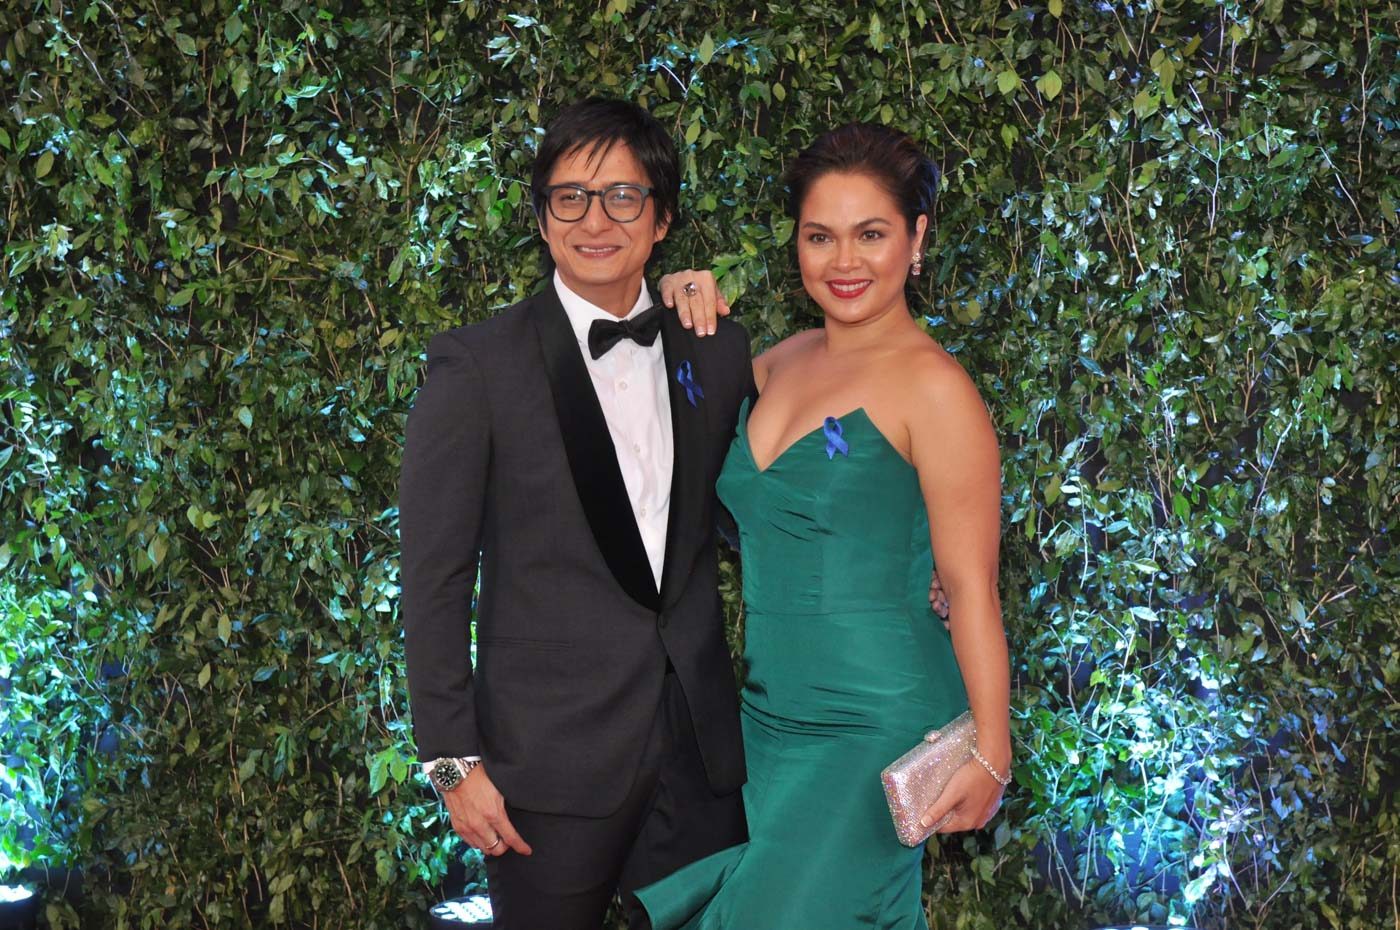 Ball for a cause: 5 things you need to know about the ABS-CBN Ball 2019